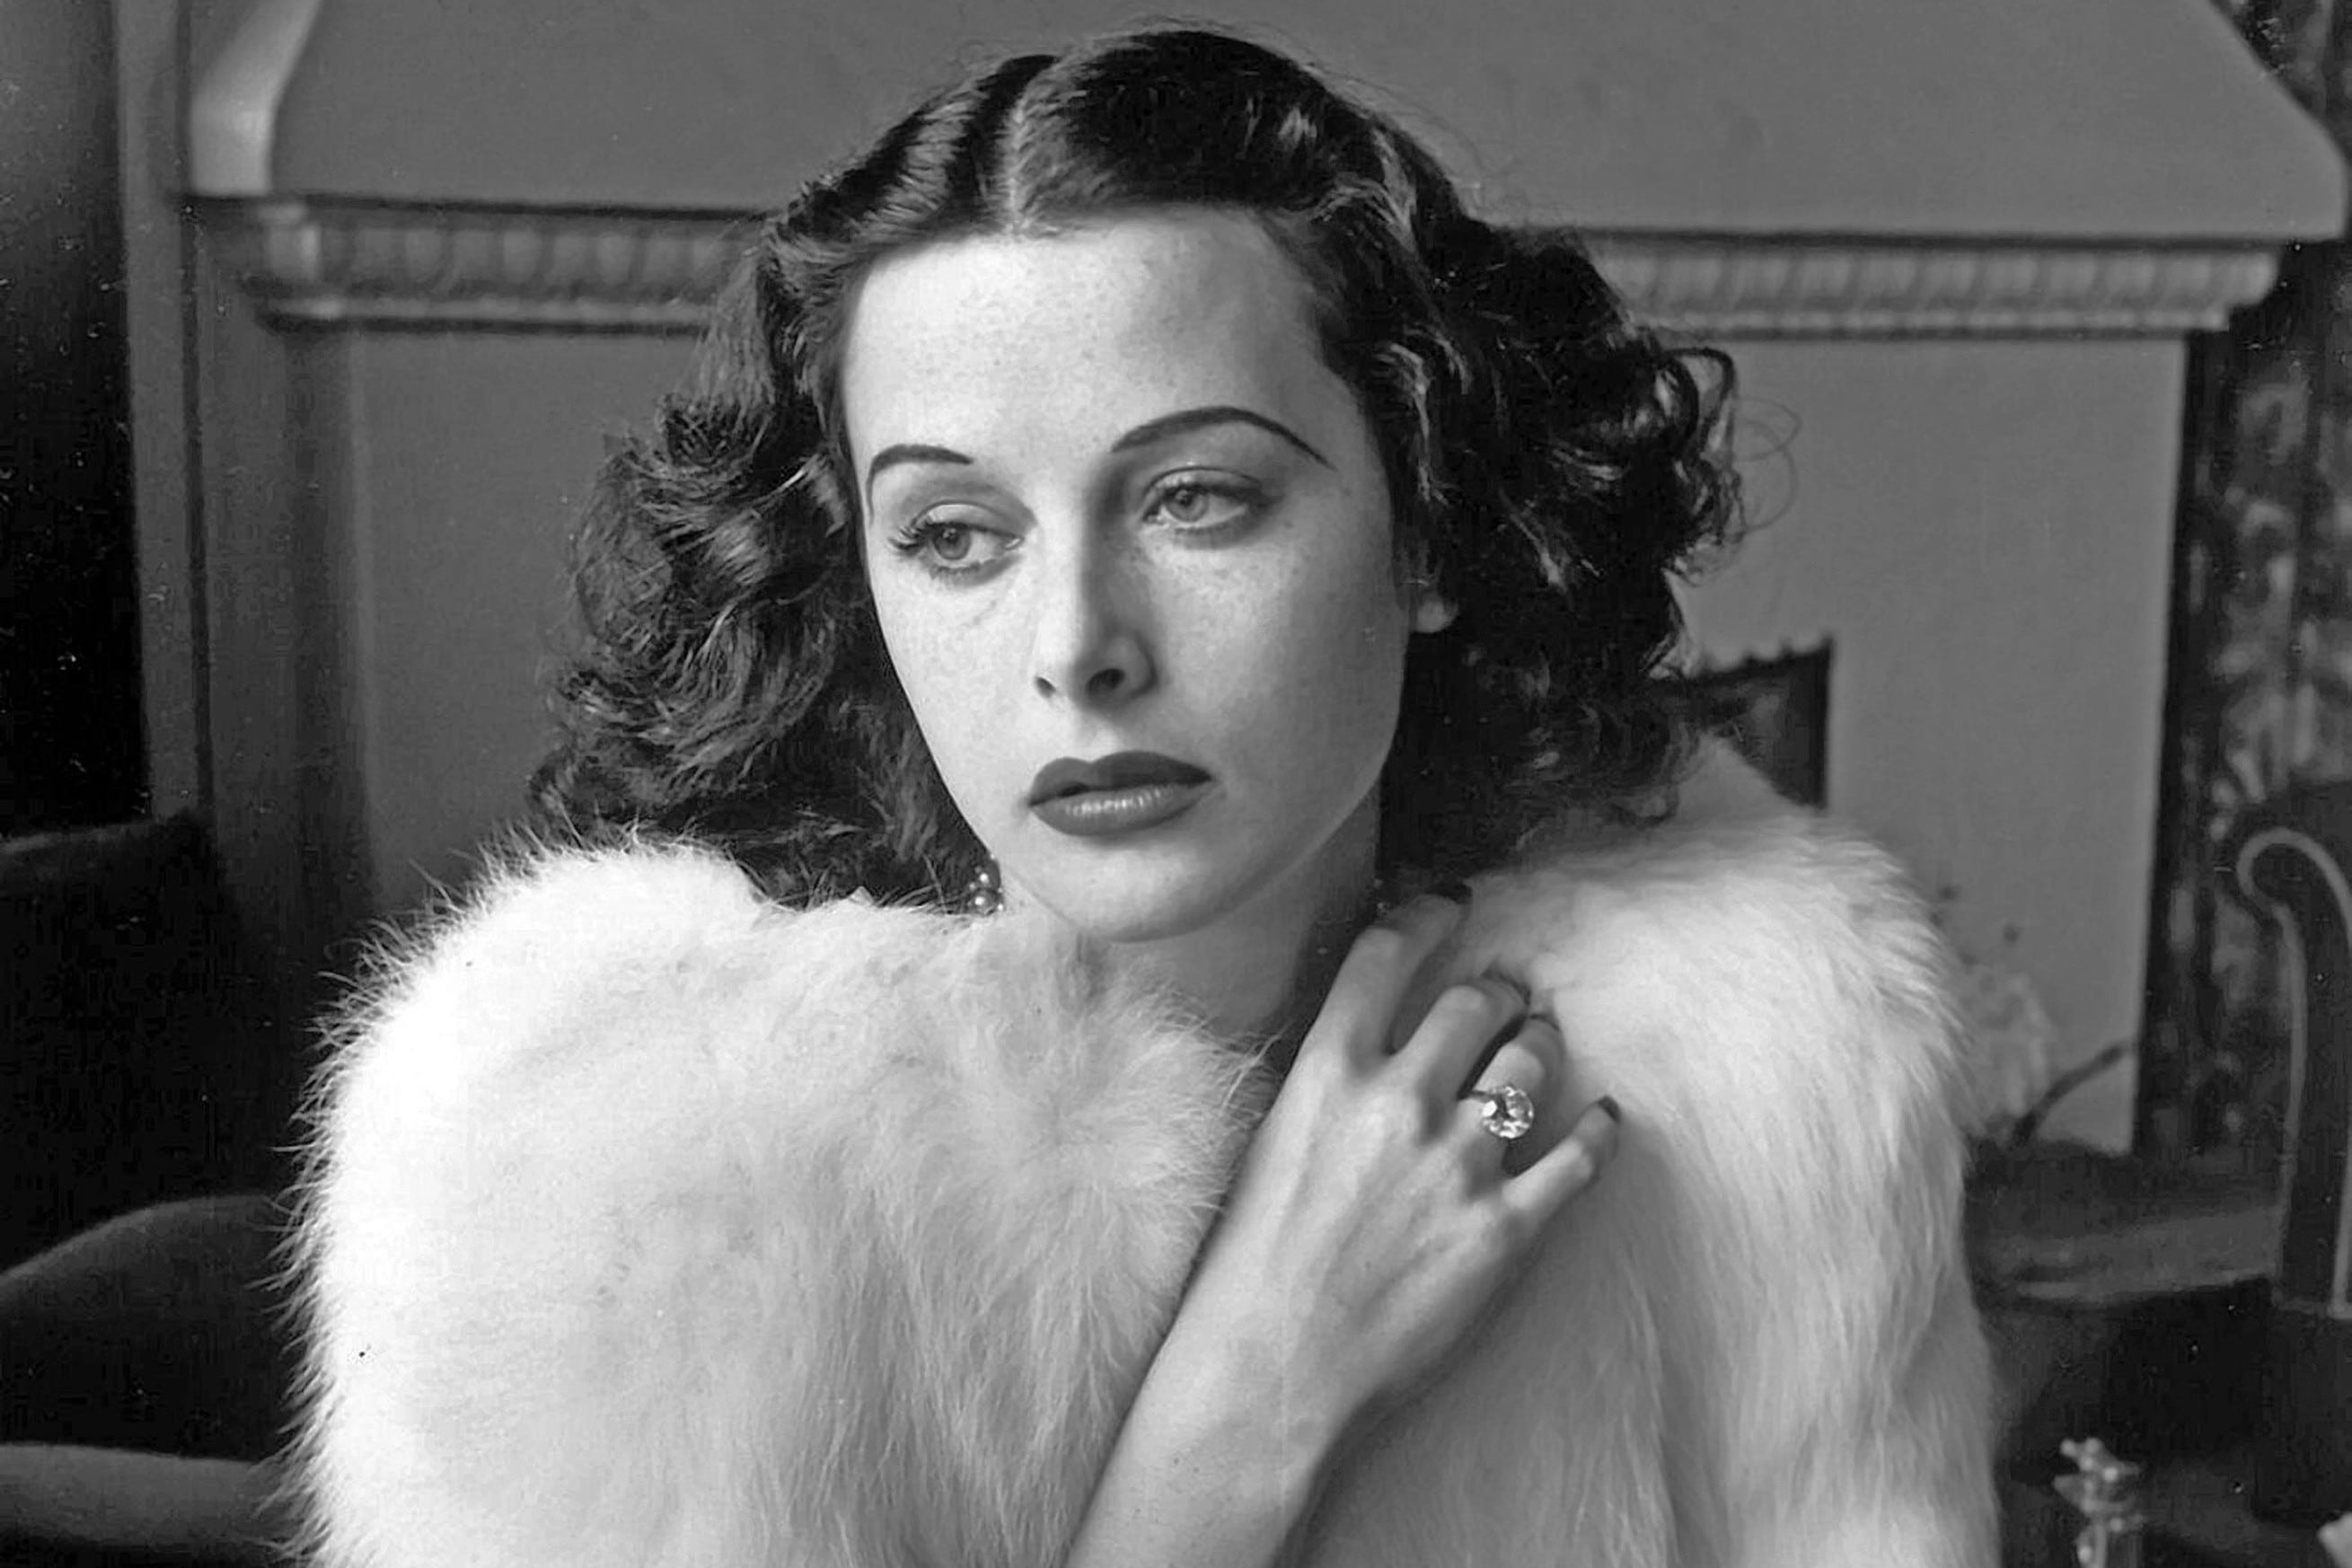 Bombshell: The Hedy Lamarr Story' Unearths a Modern Inspiration